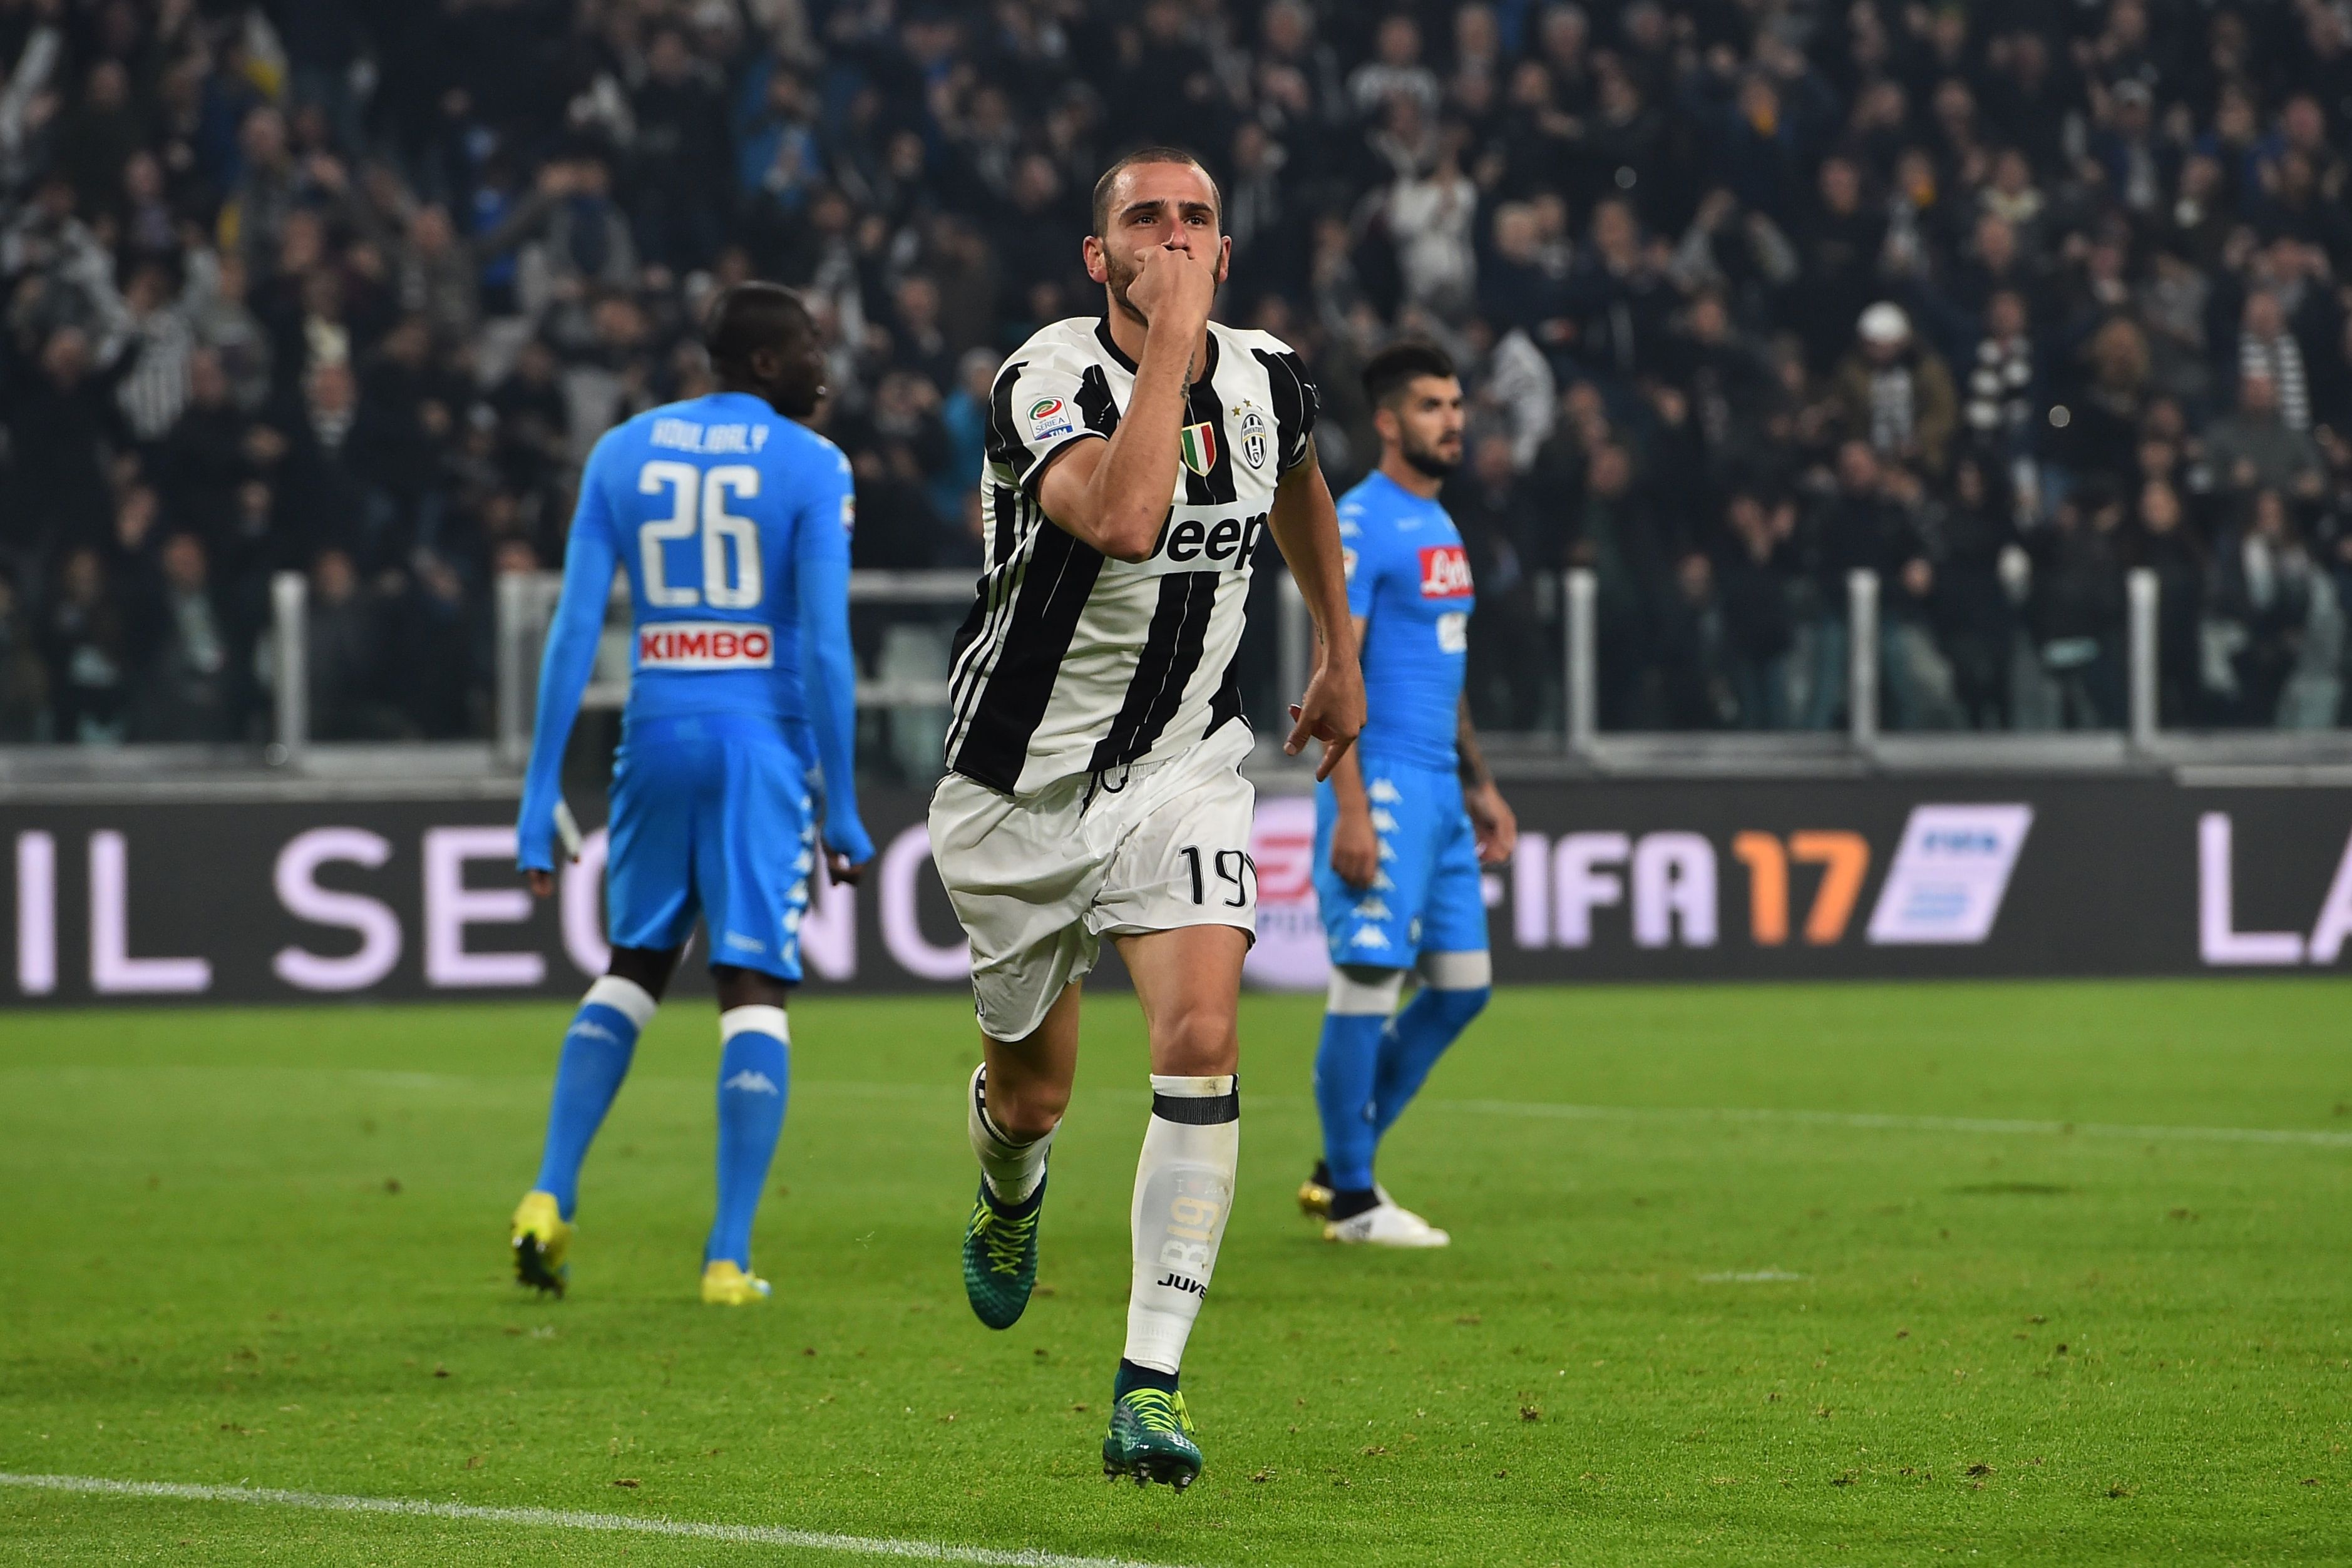 Juventus' Italian defender Leonardo Bonucci celebrates after scoring a goal during the Italian Serie A football match Juventus vs Napoli at Juventus Stadium in Turin on October 29,  2016. / AFP / GIUSEPPE CACACE        (Photo credit should read GIUSEPPE CACACE/AFP/Getty Images)